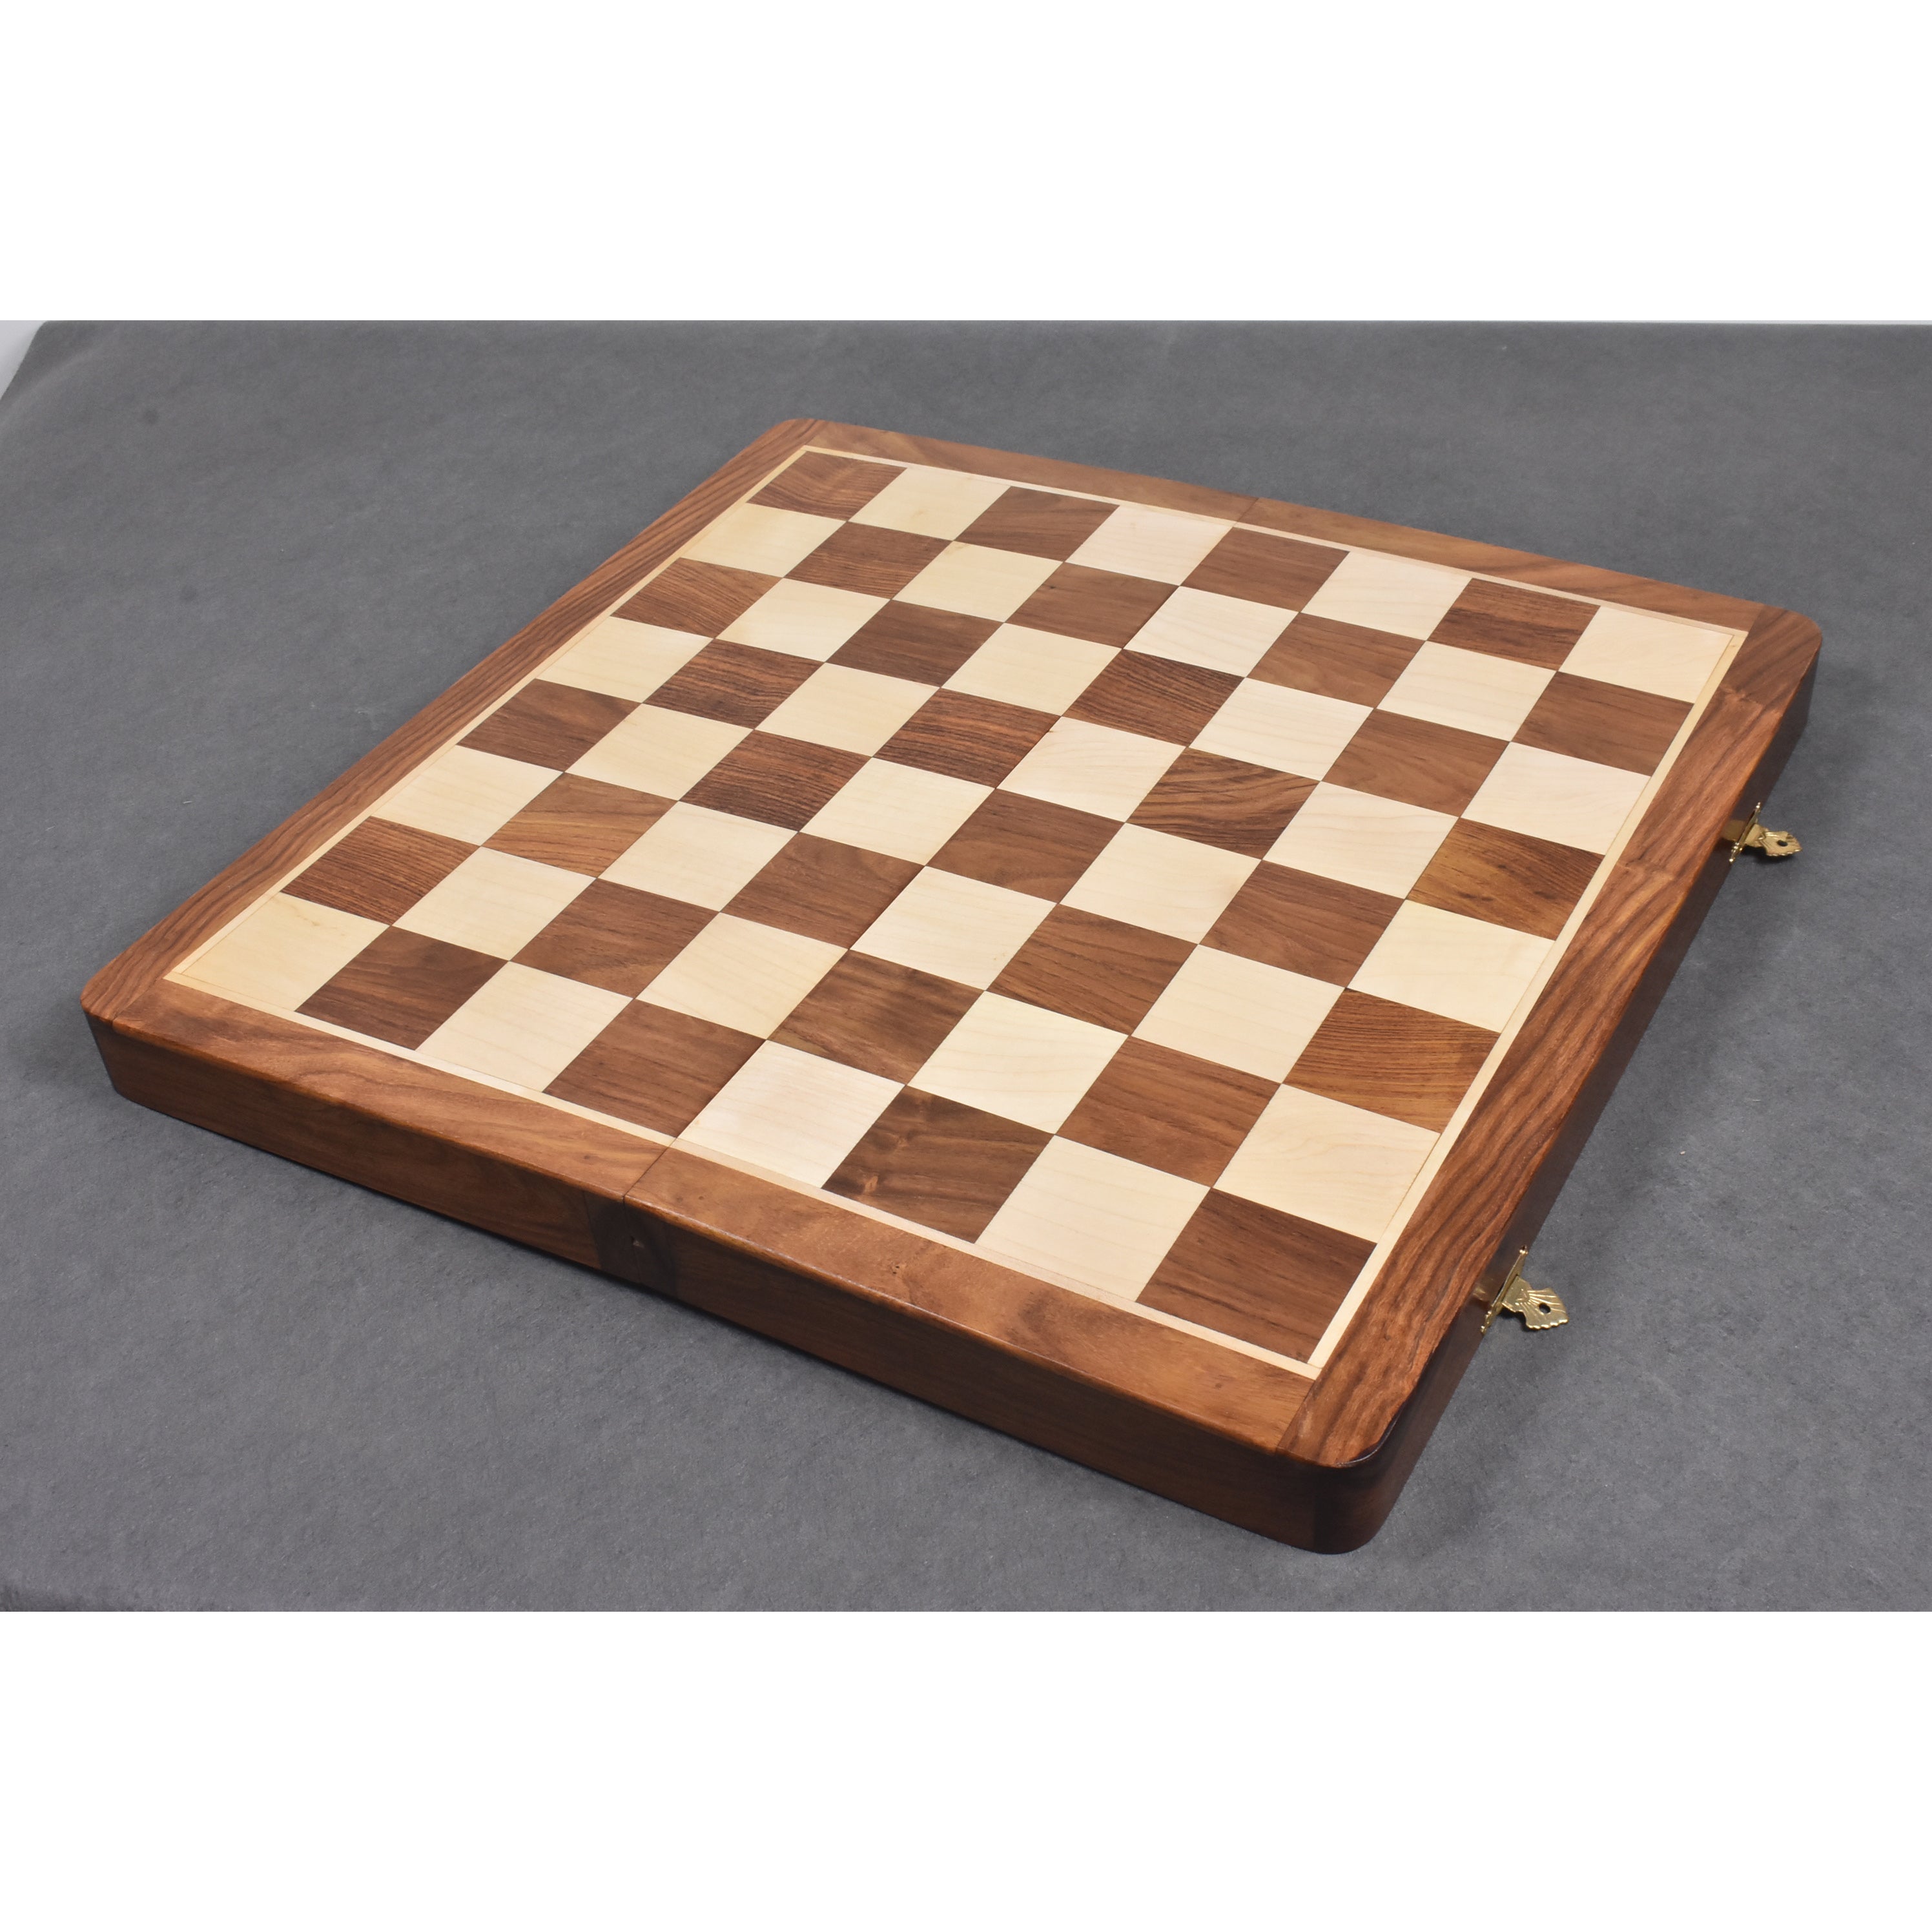 Slightly Imperfect 20" Very Large Golden Rosewood & Maple Wooden Inlaid Chess Set